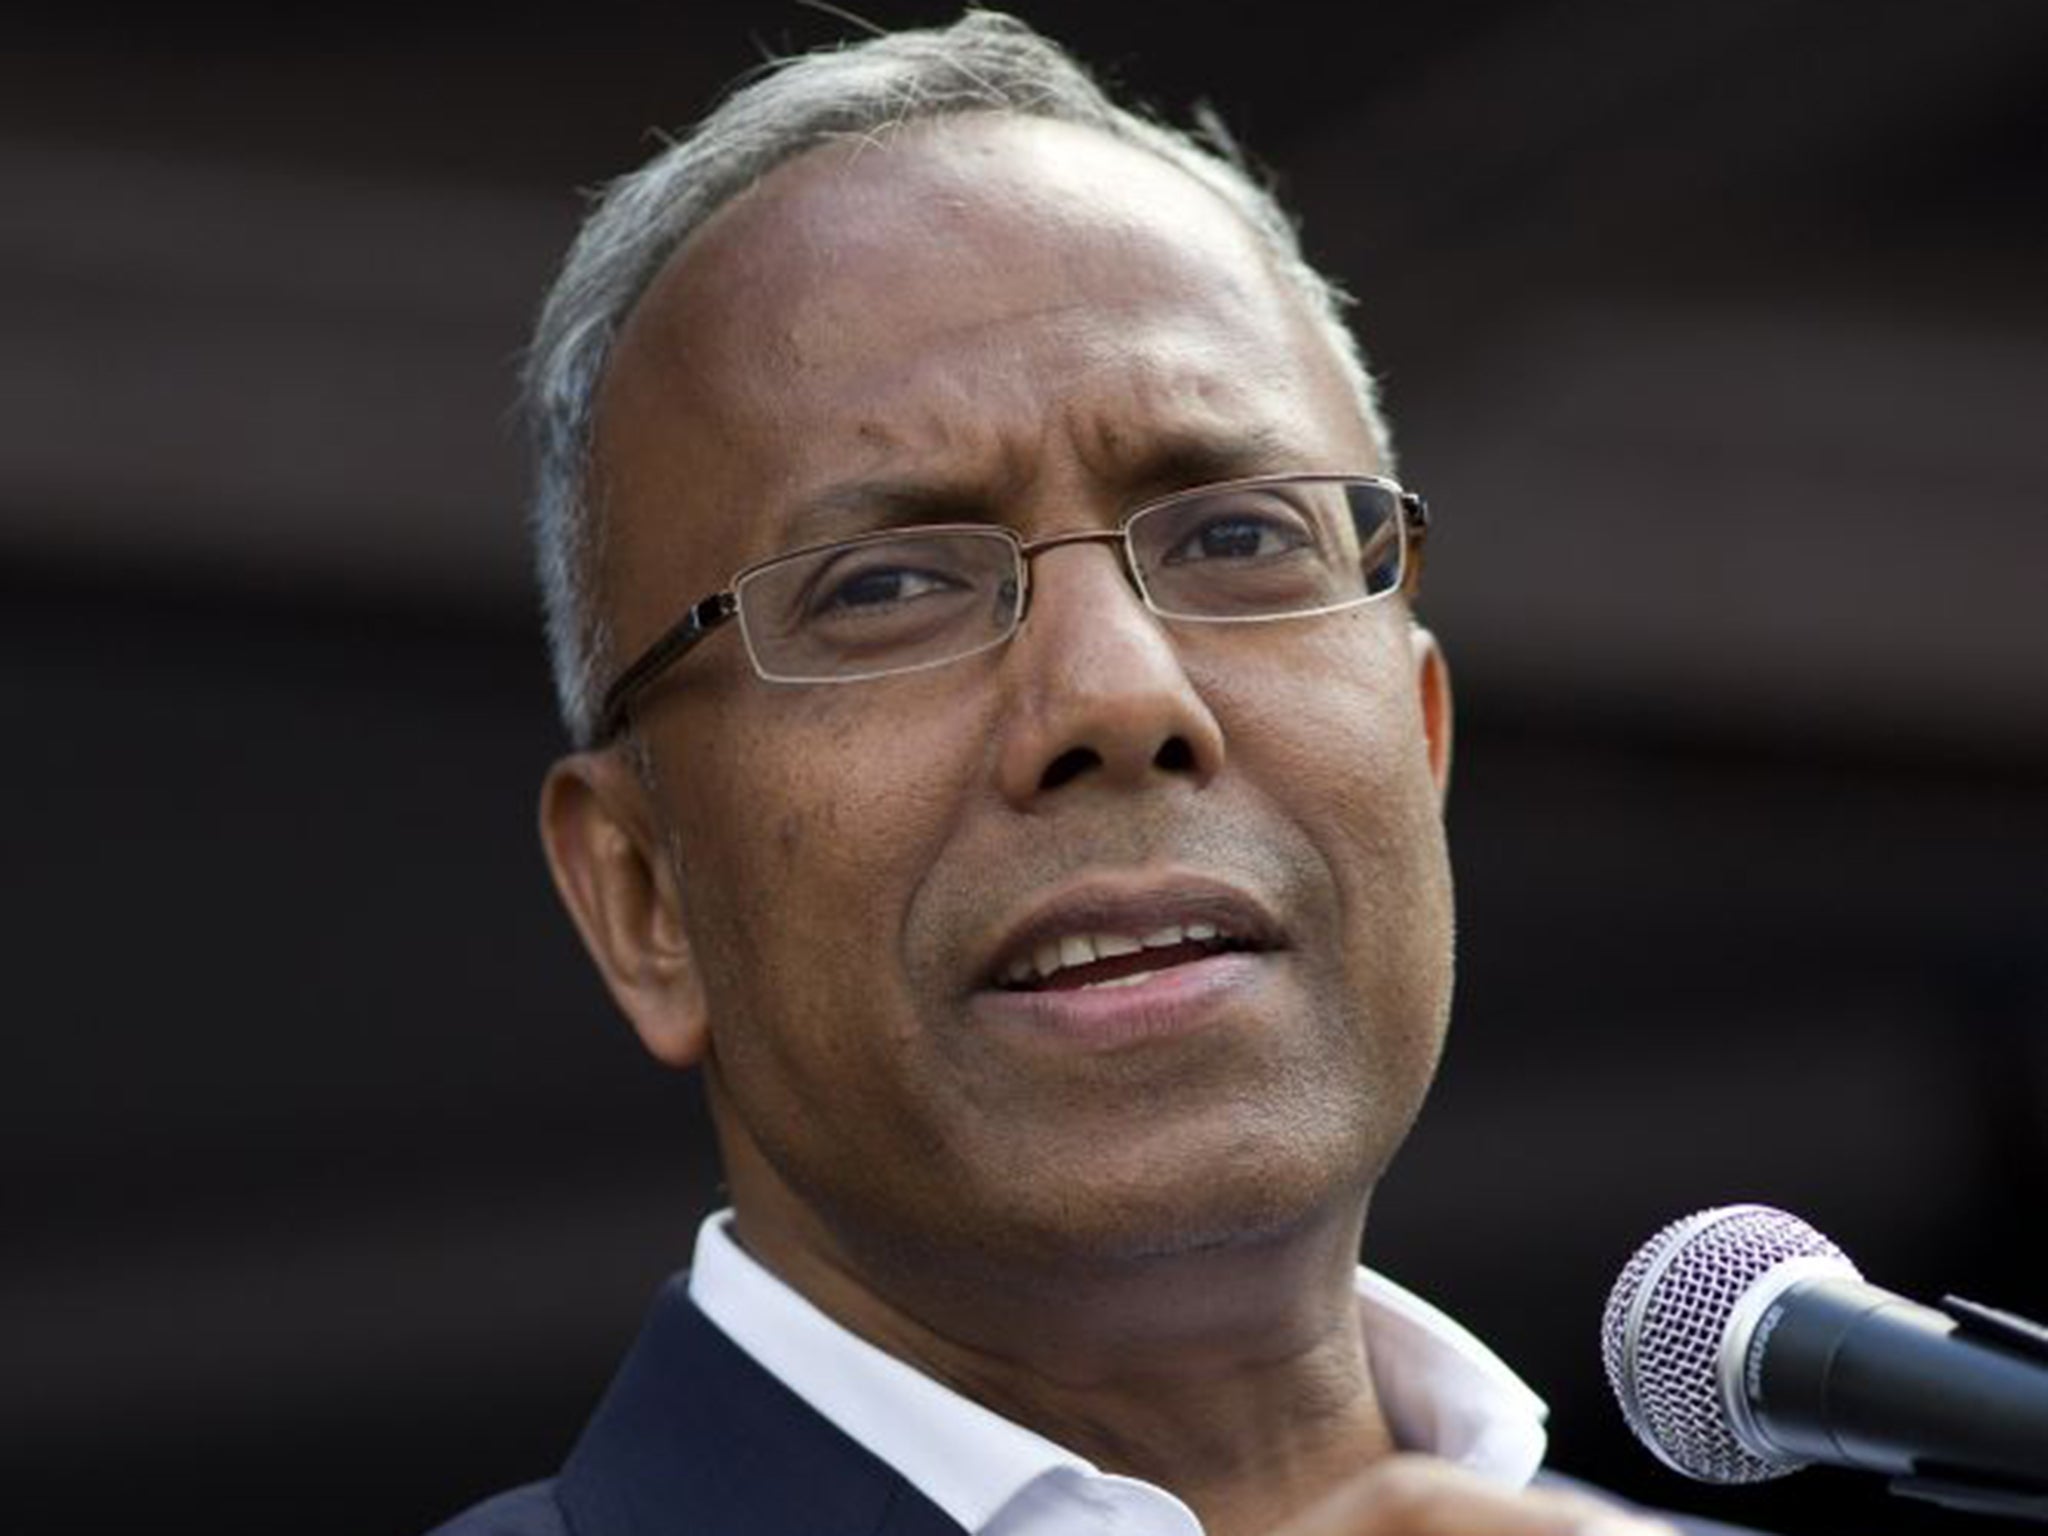 Lutfur Rahman was cast from office after a report found him he had committed multiple electoral frauds